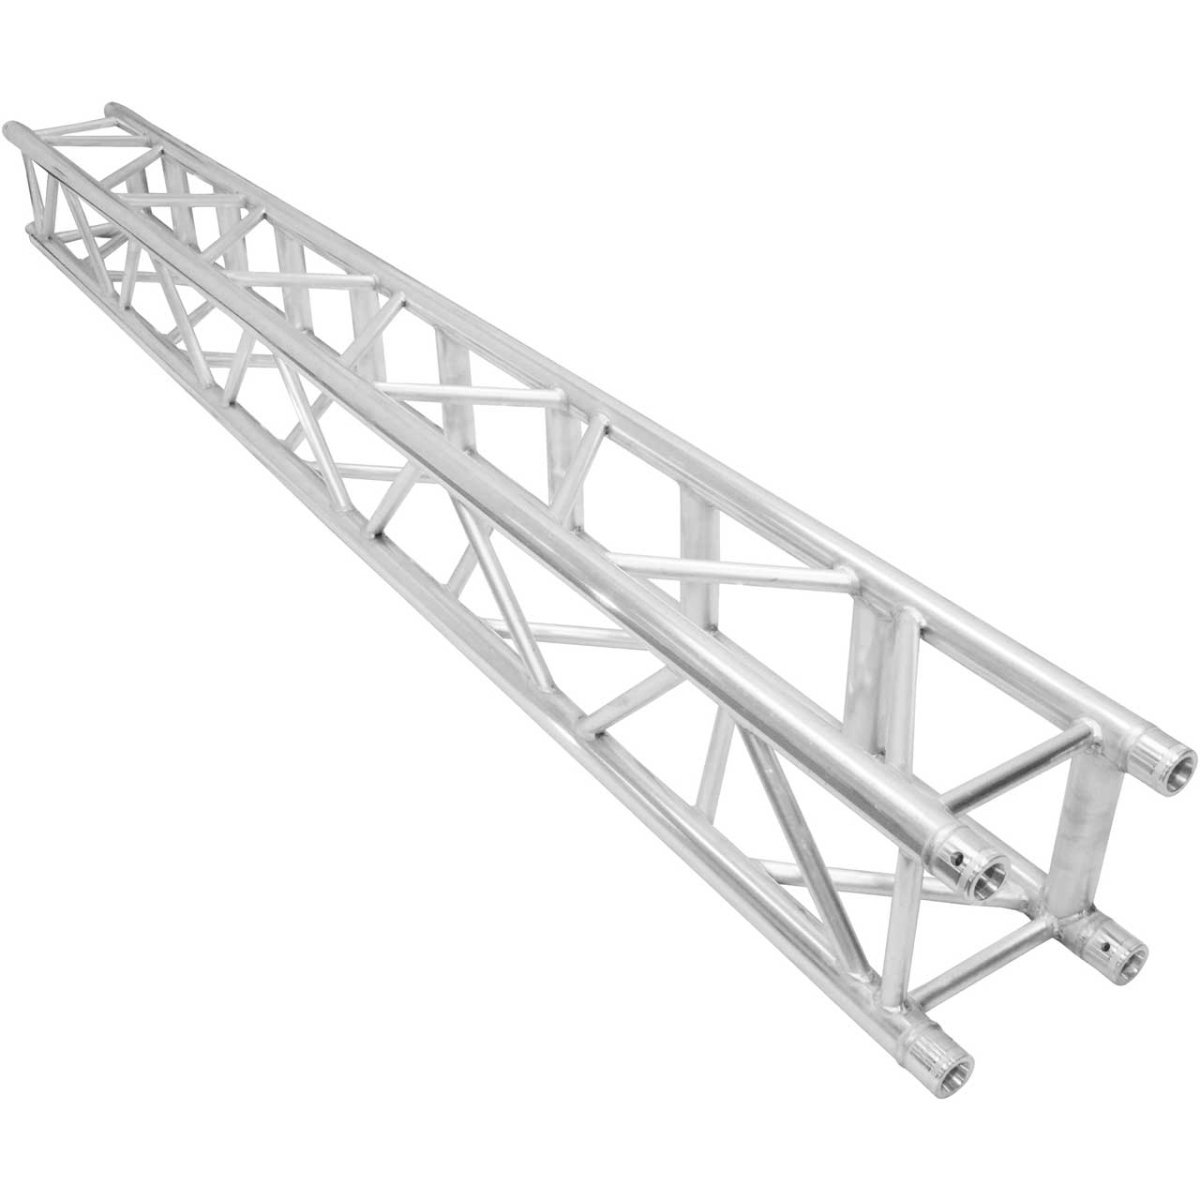 Picture of ProX Live Performance Gear PXG-XT-SQPL984 9.84 ft. F34 Professional Ladder Truss Segment with 3 mm Tubing